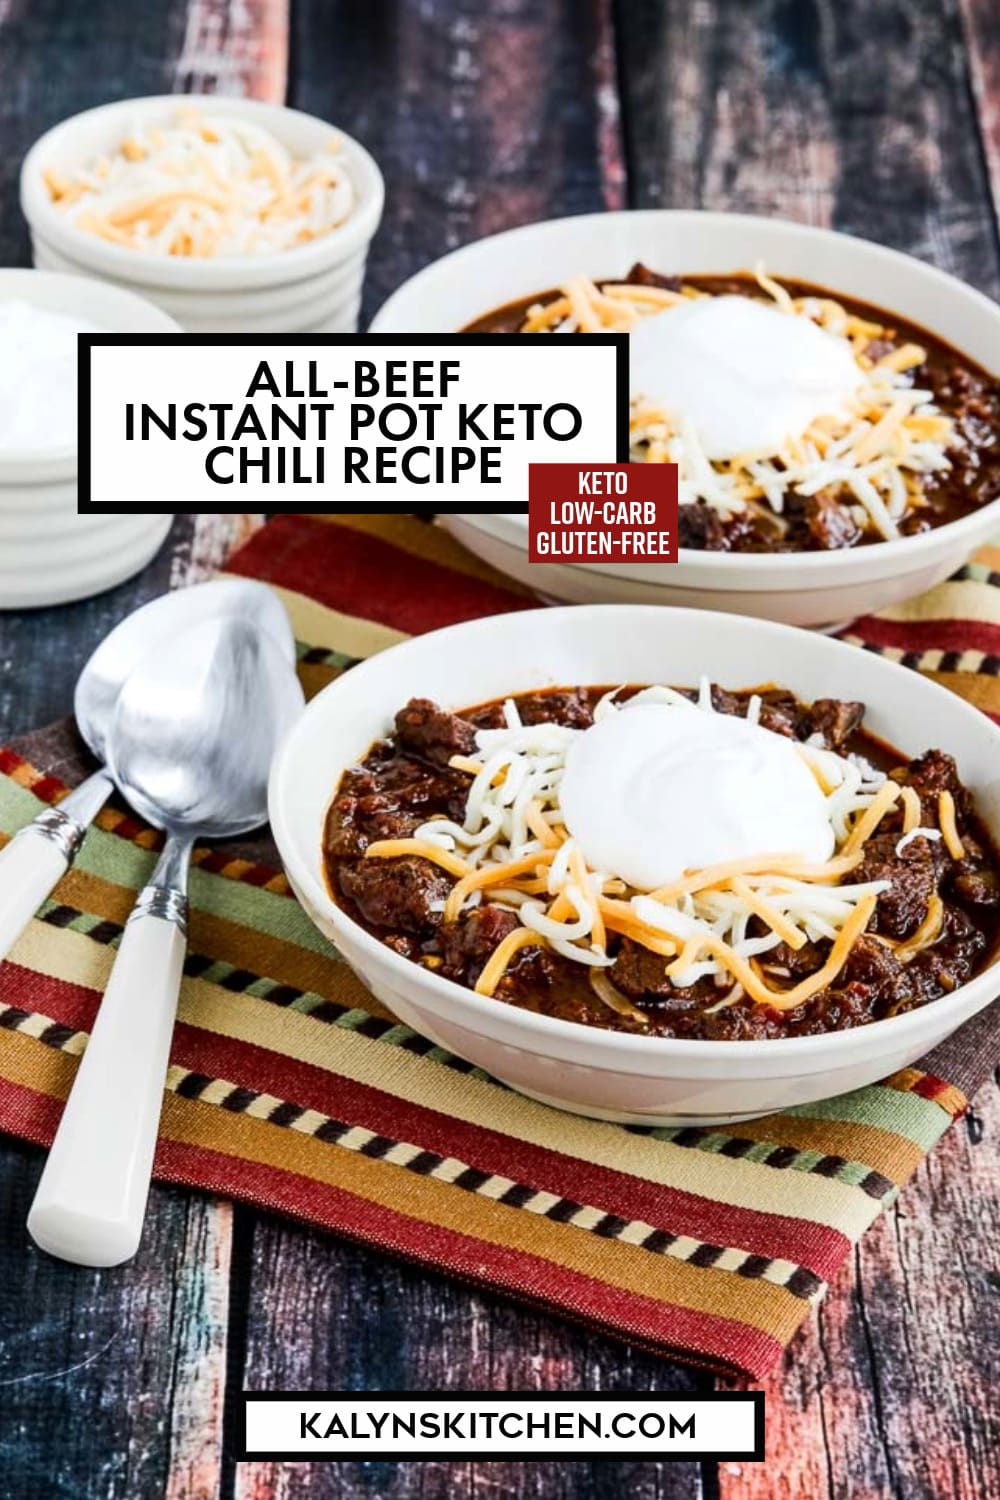 Pinterest image of All-Beef Instant Pot Keto Chili Recipe